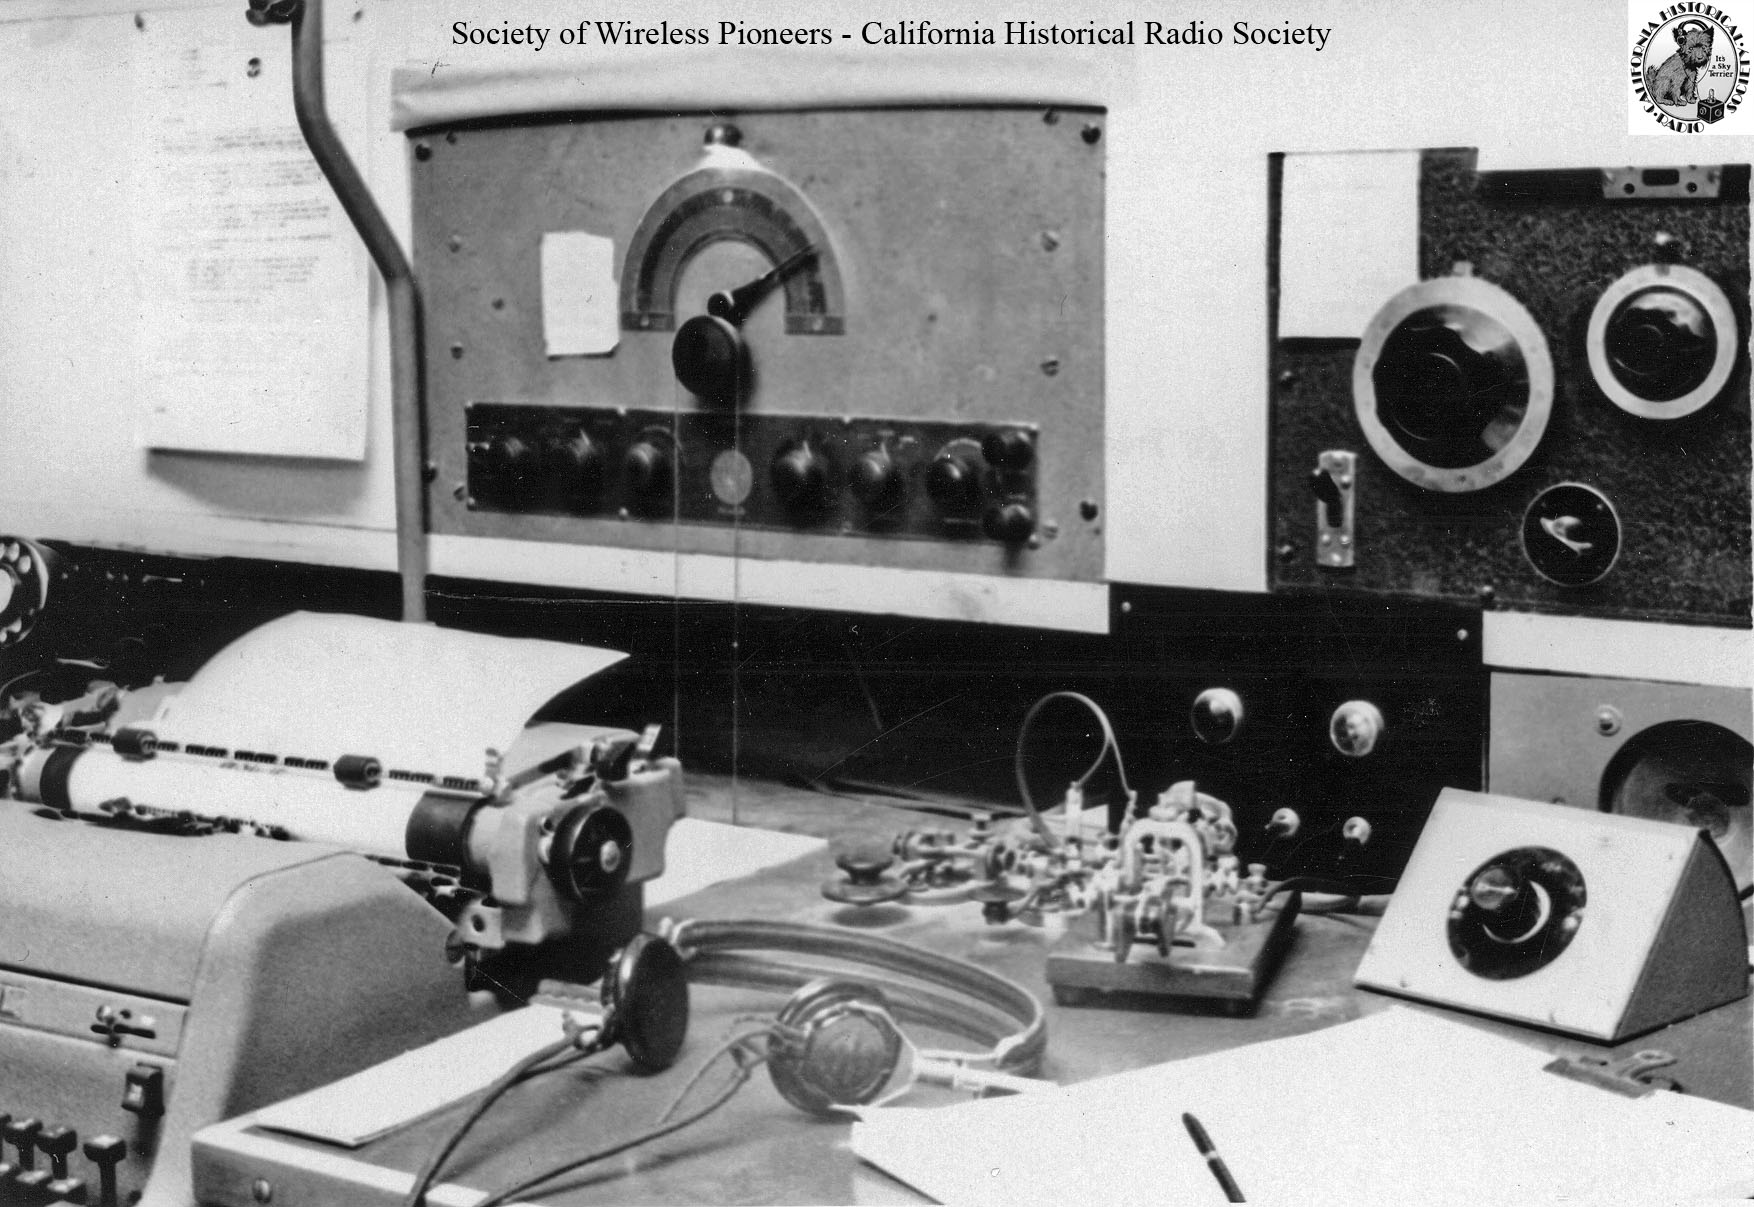 Misc Photos - Society of Wireless Pioneers